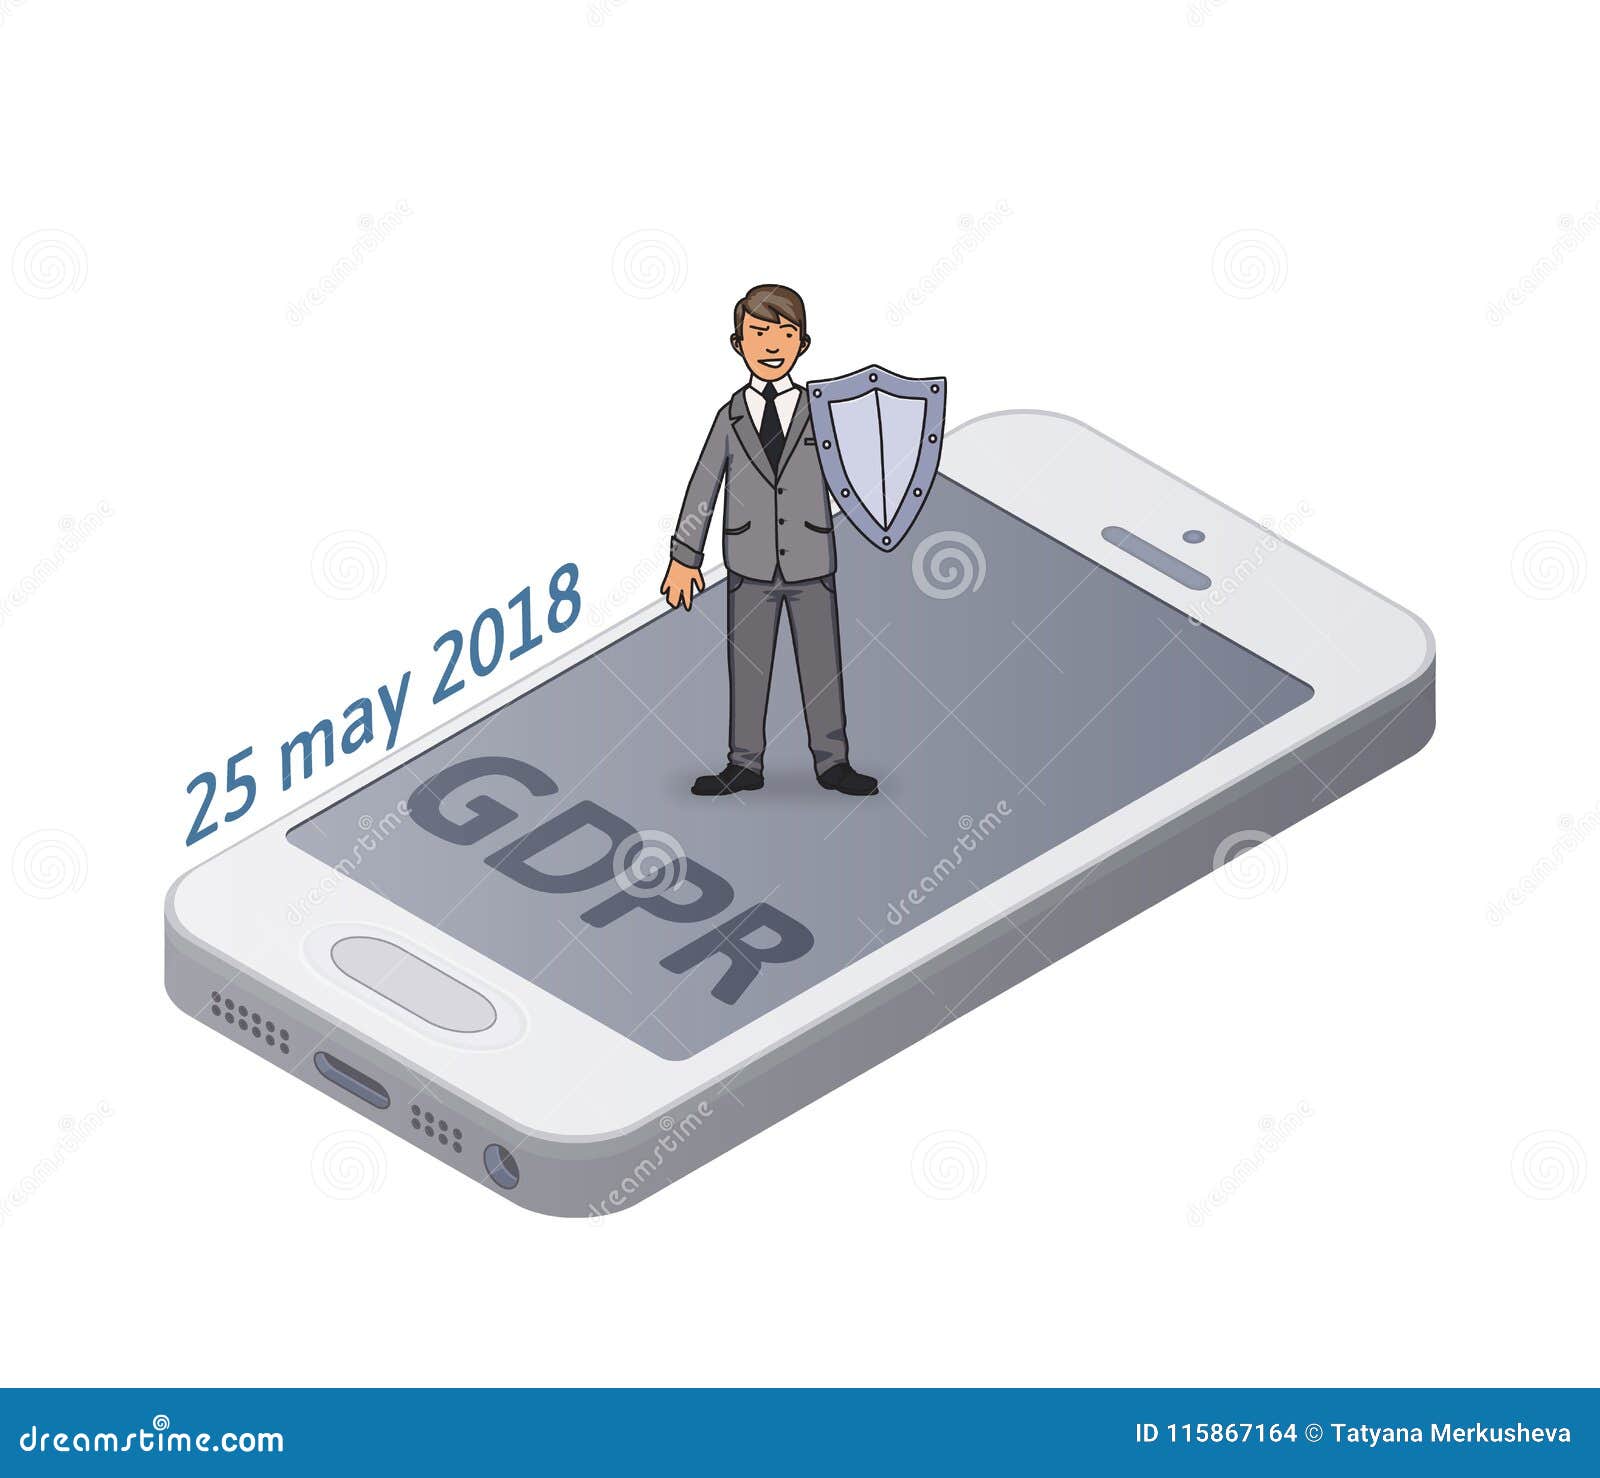 man in suit with a shield protecting smartphone and personal data. gdpr initiation date. data protection. gdpr, rgpd